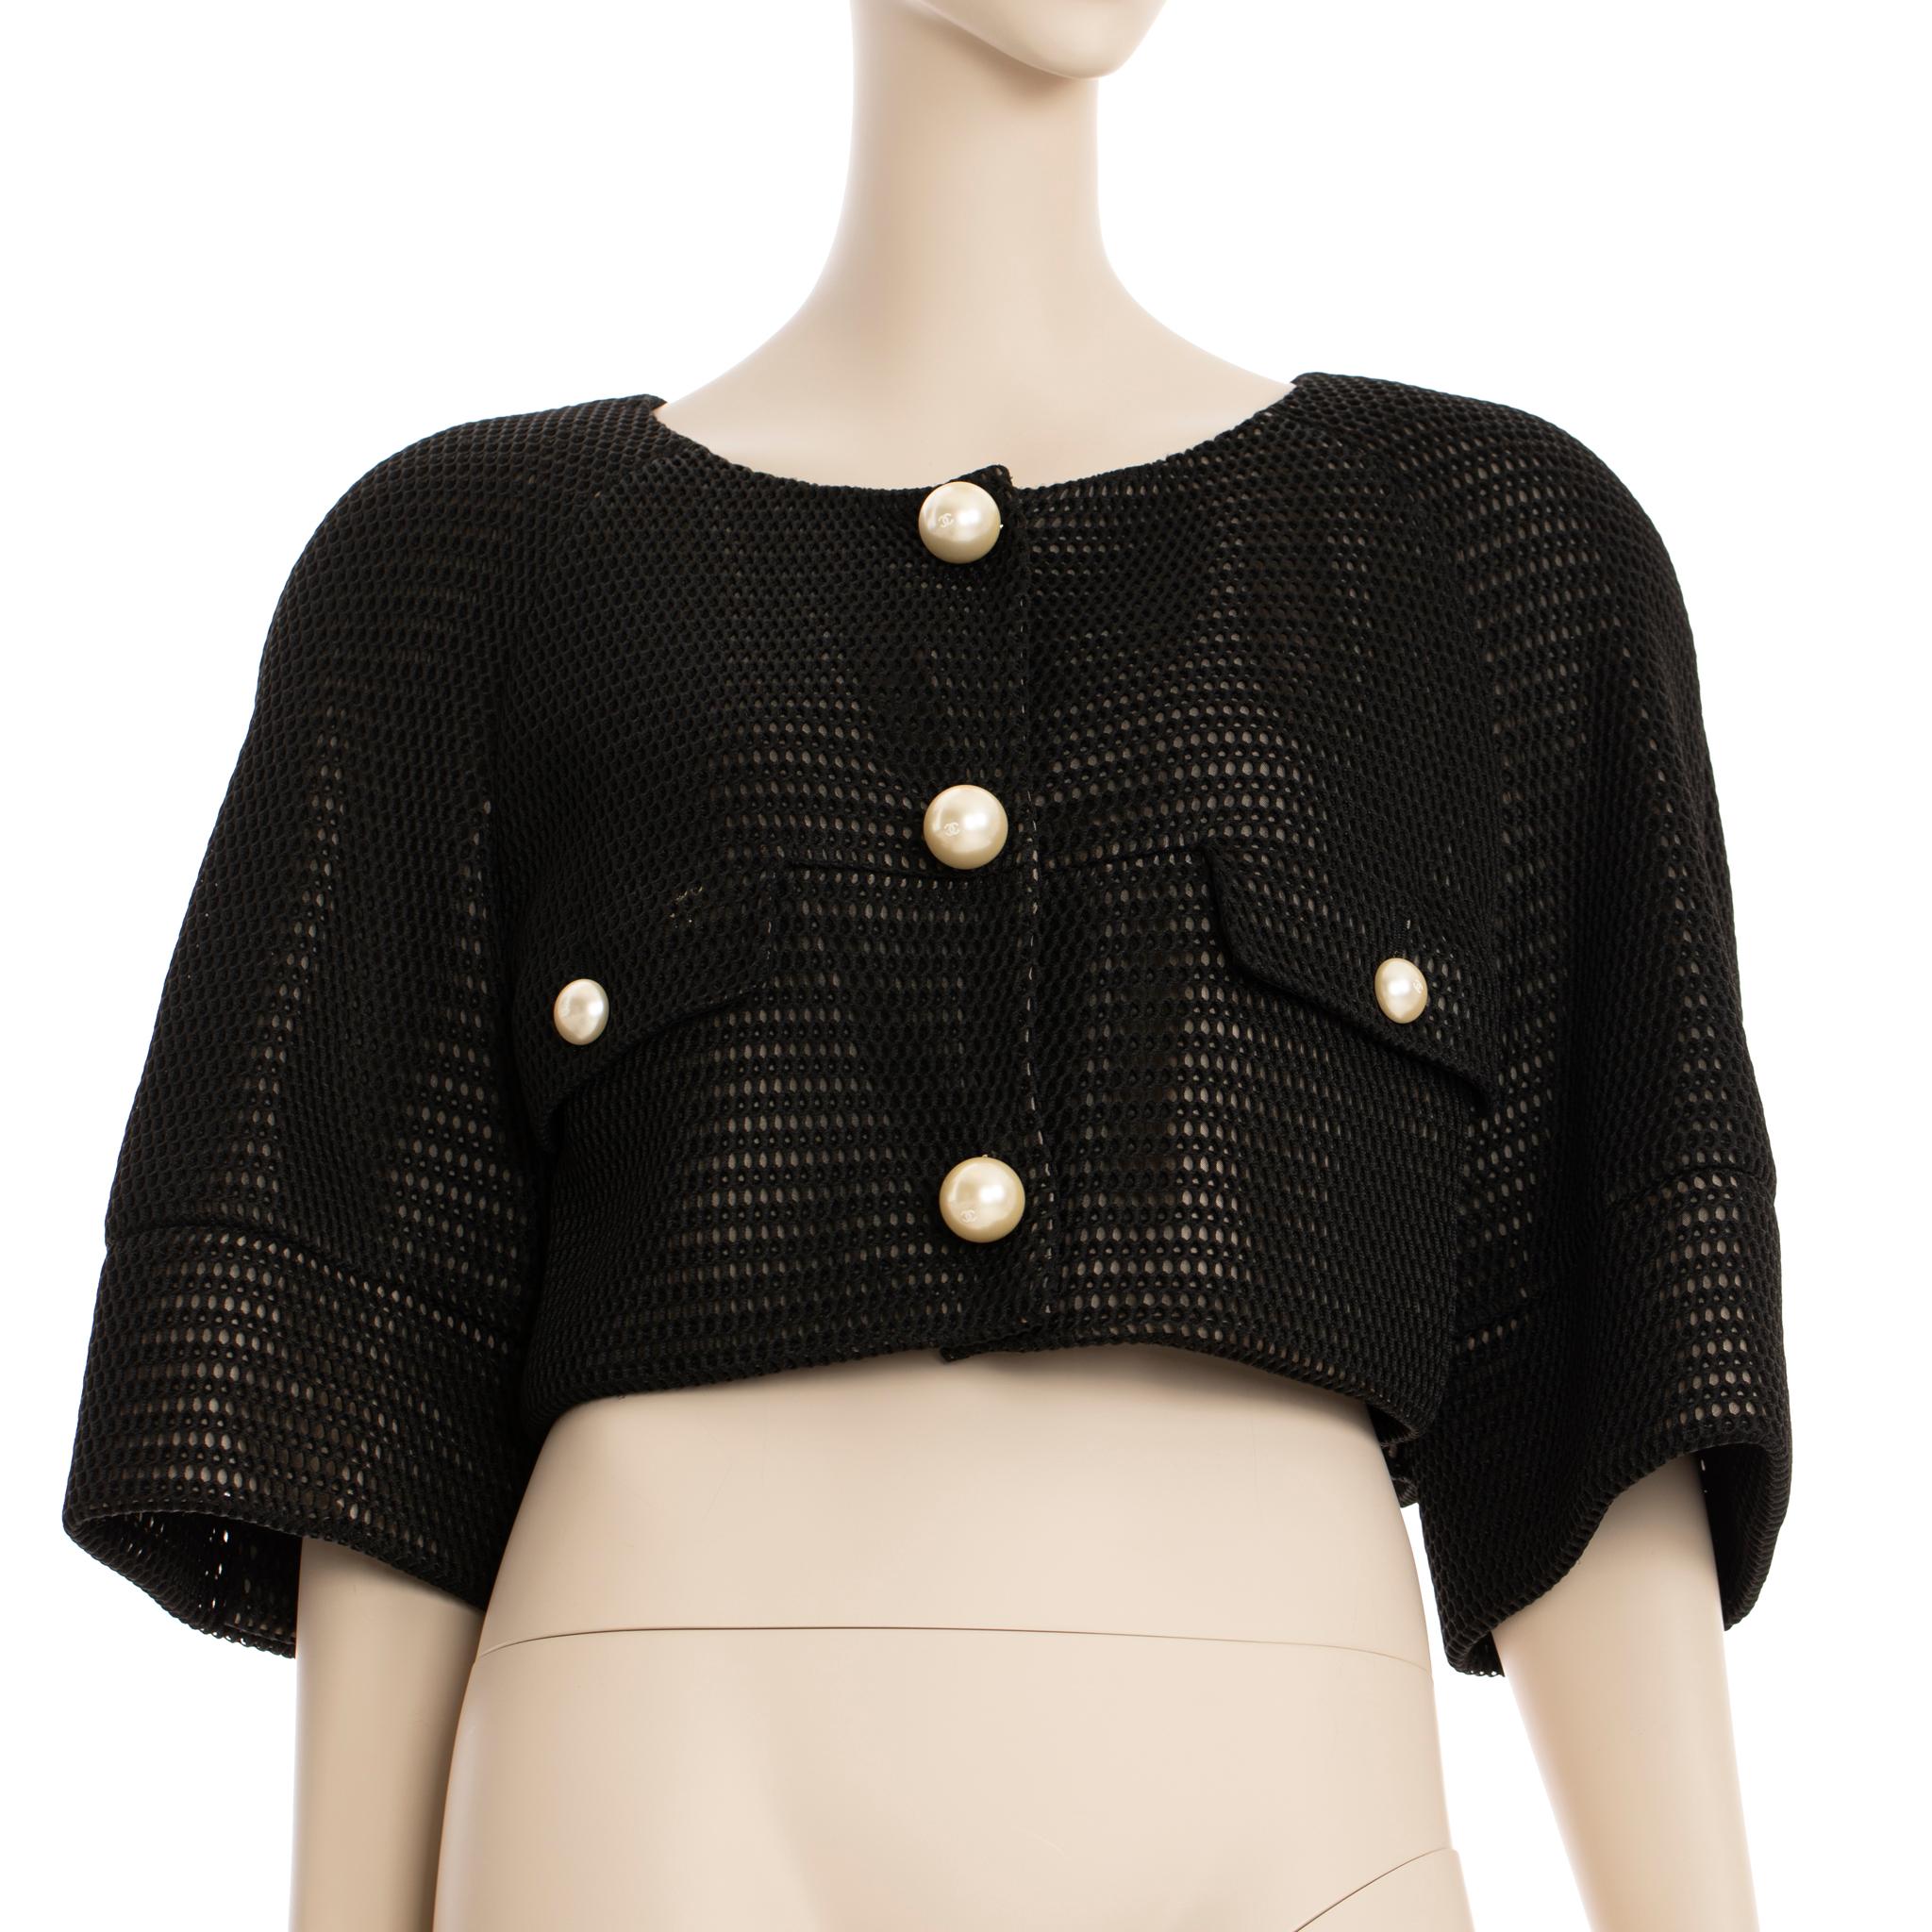 The Chanel Crop Mesh Black Jacket is the perfect addition to any wardrobe. Crafted from mesh fabric with faux pearl details, this jacket is stylish and sophisticated. With its cropped length, it’s perfect for both formal and casual occasions.